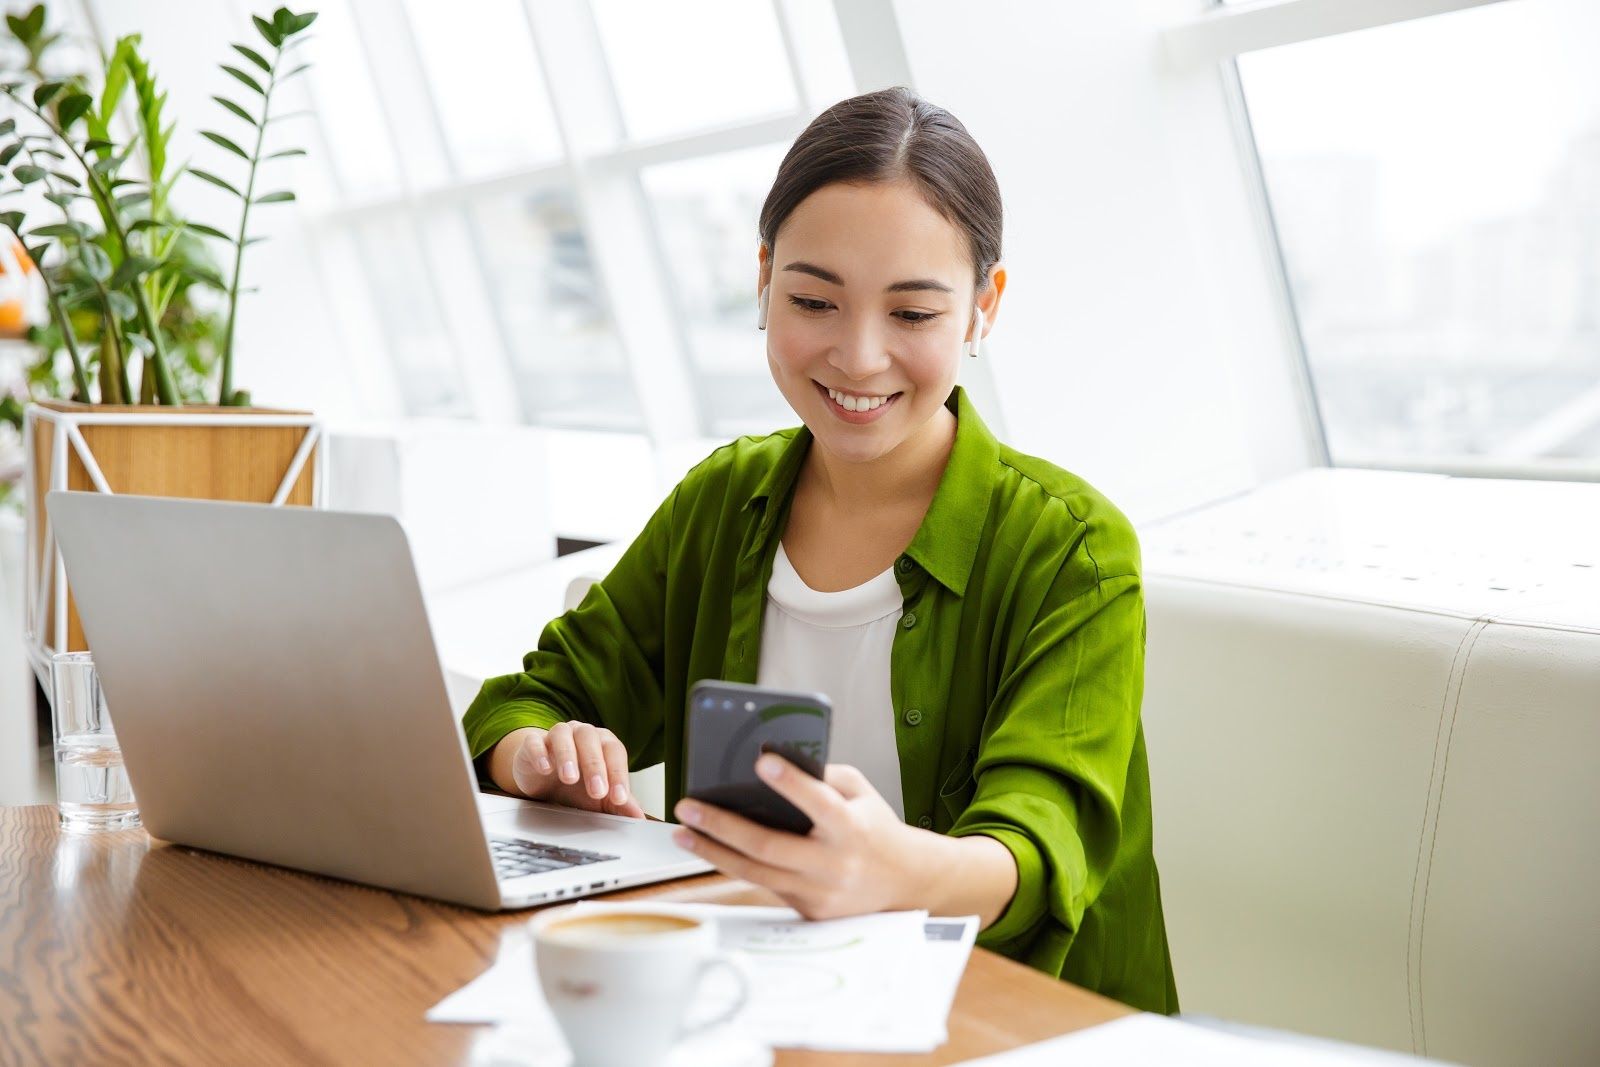 woman sitting down with laptop looking at her phone smiling